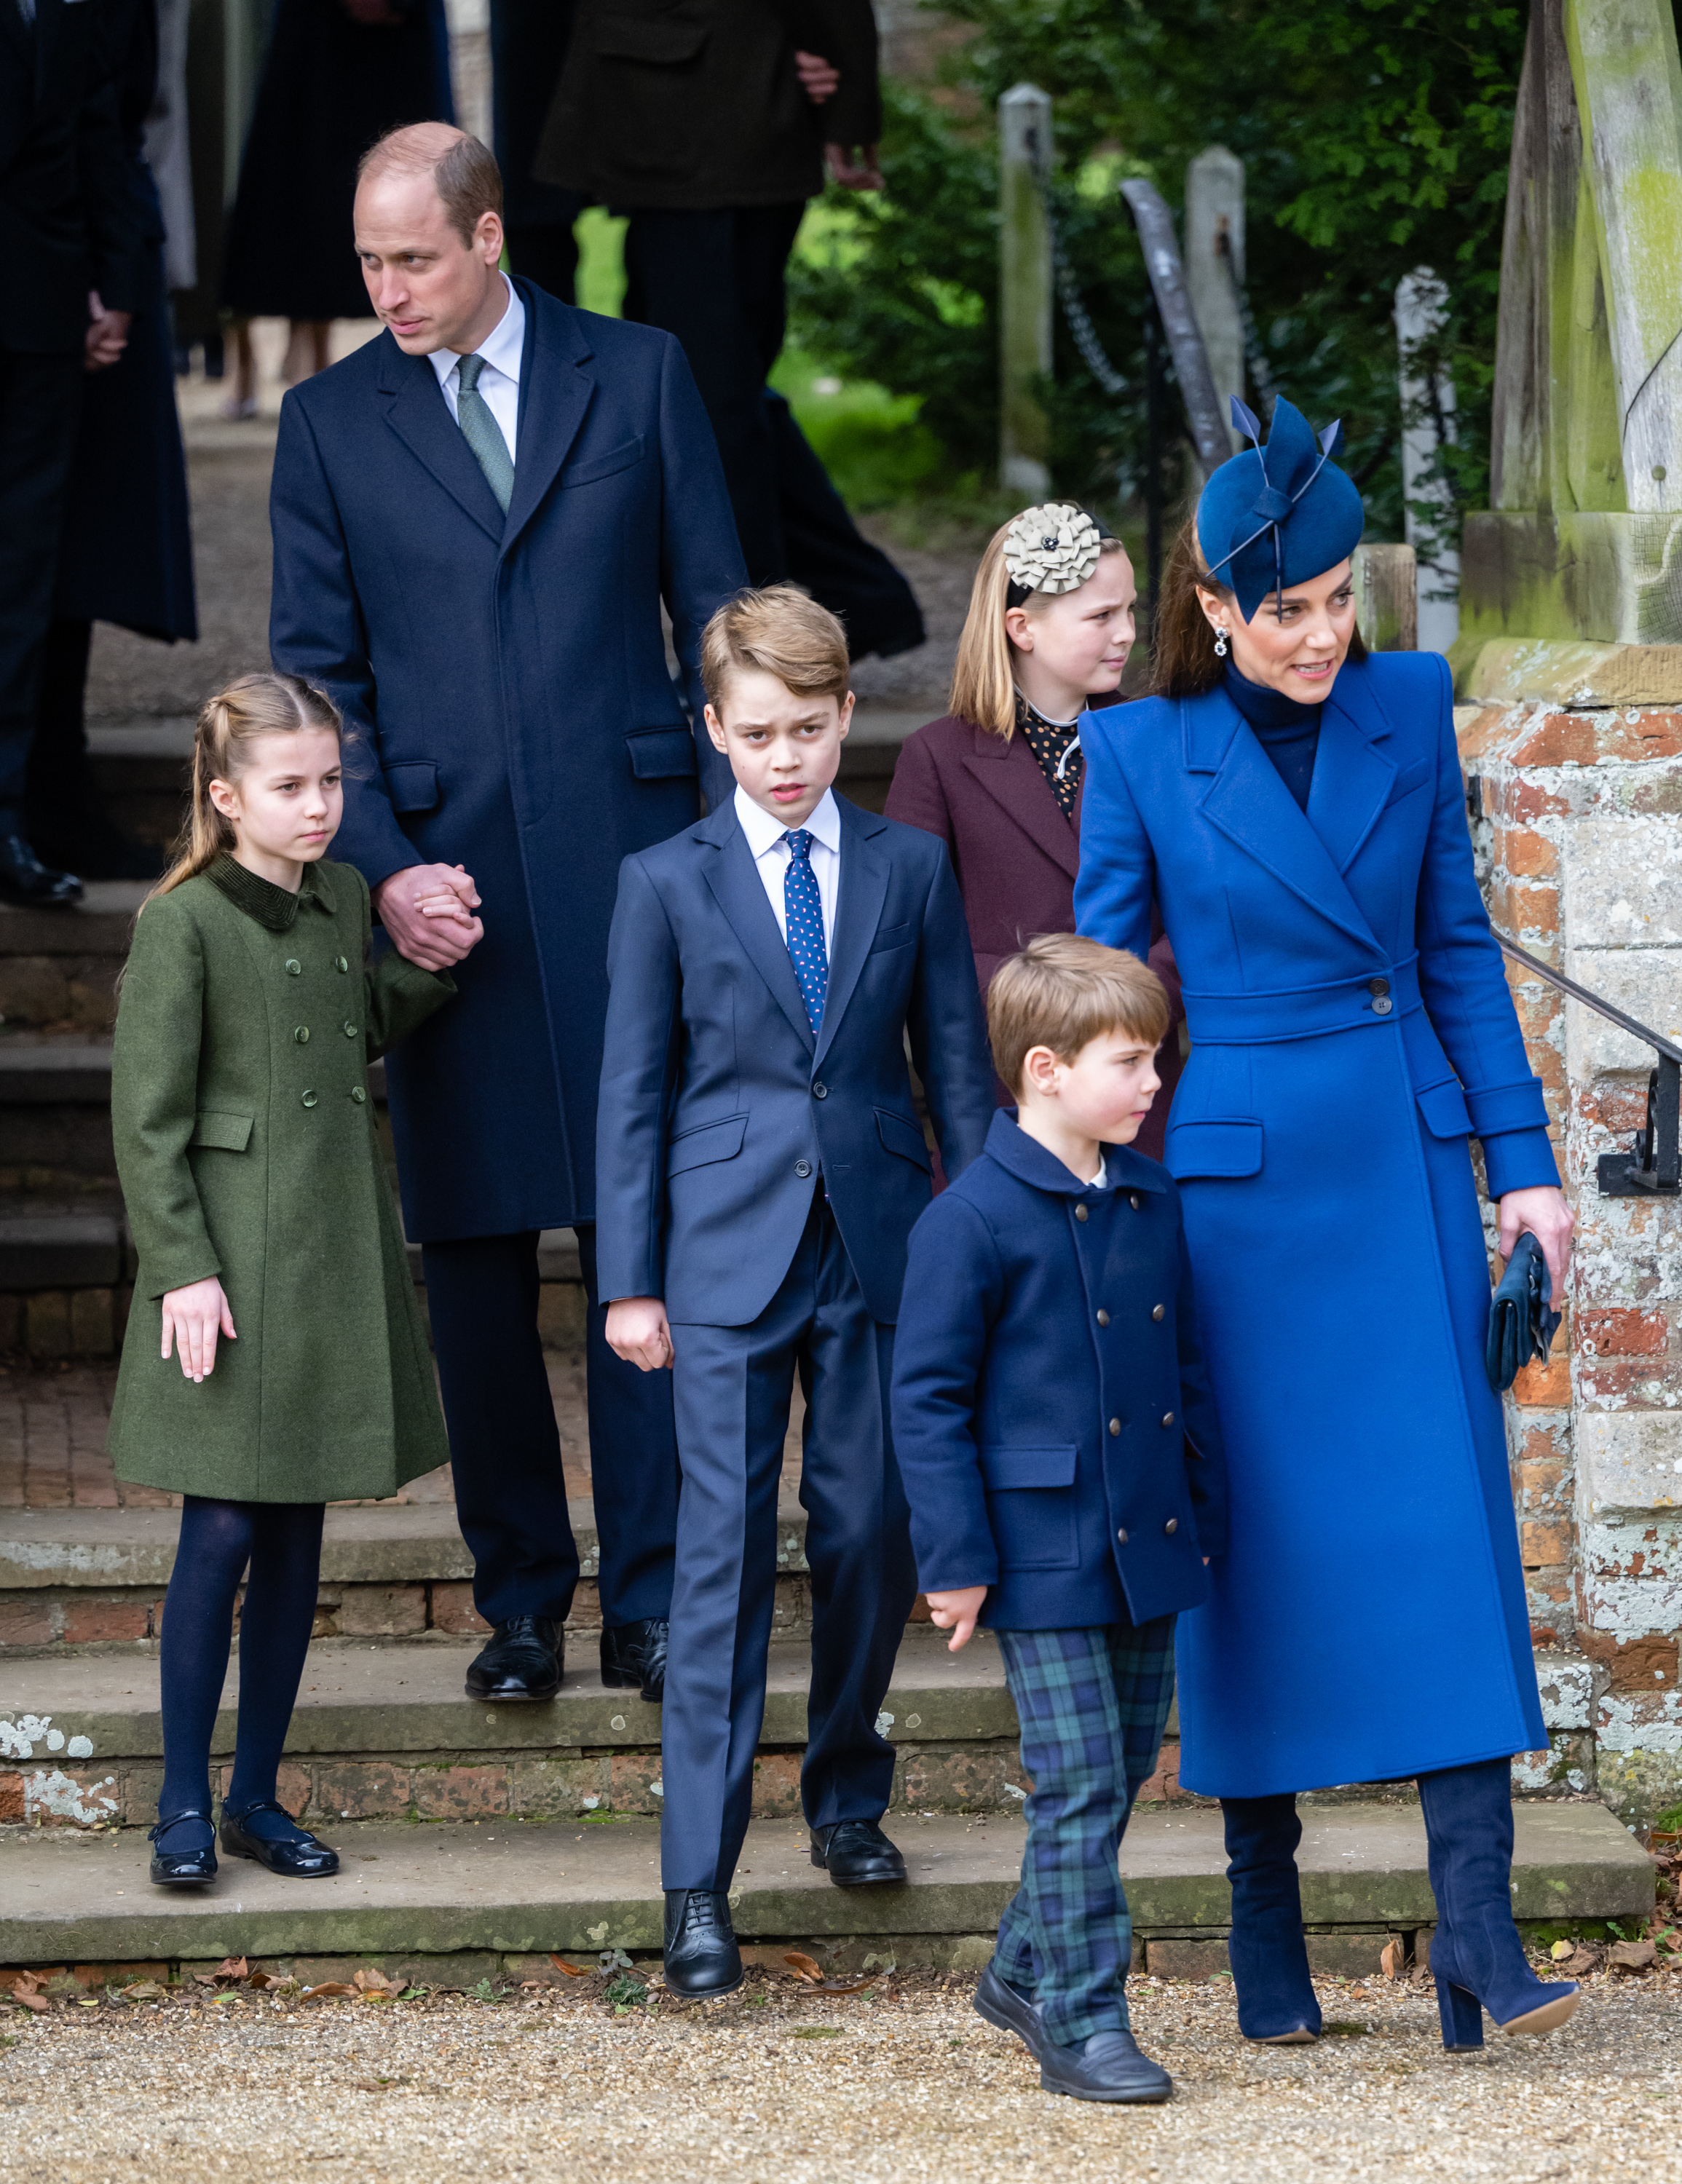 kate and william walking with their children at a royal event